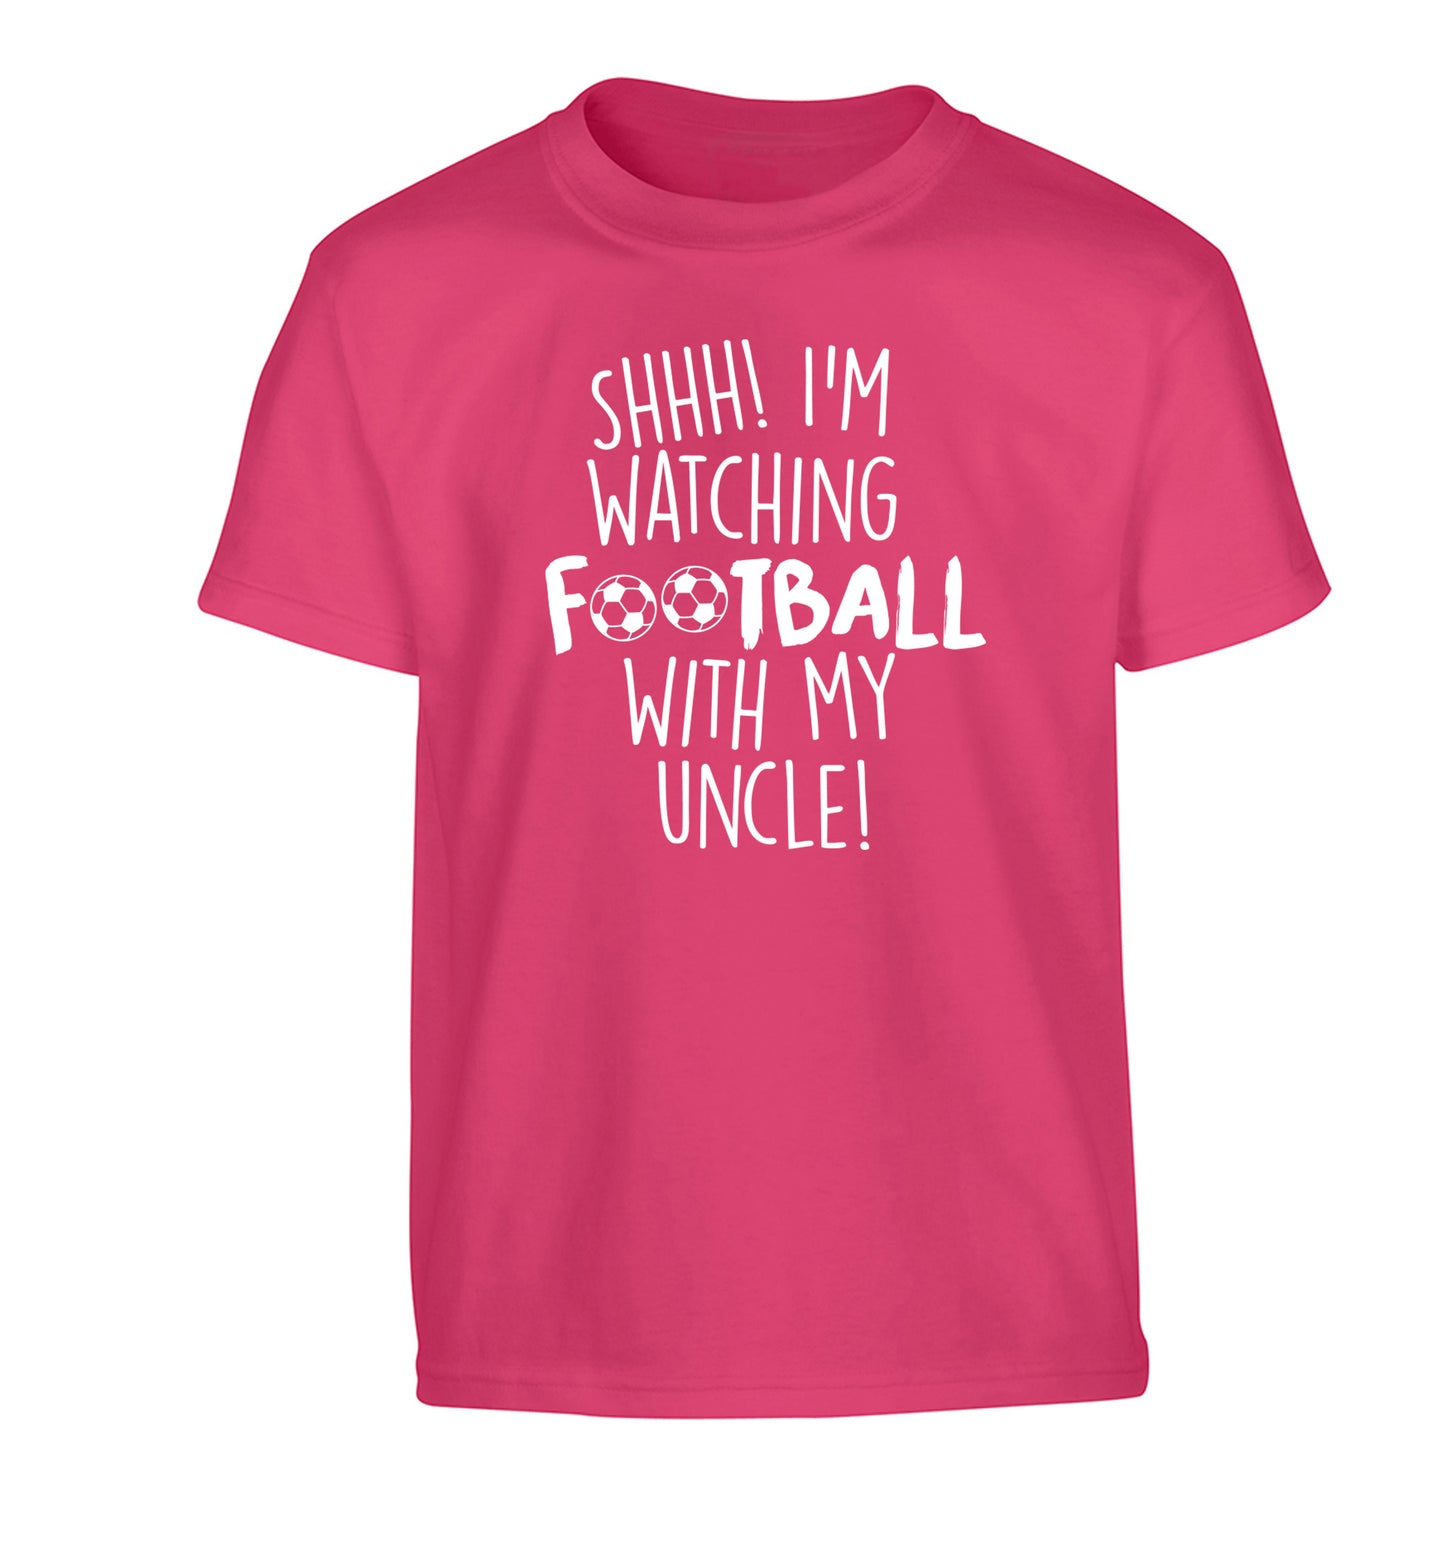 Shhh I'm watching football with my uncle Children's pink Tshirt 12-14 Years